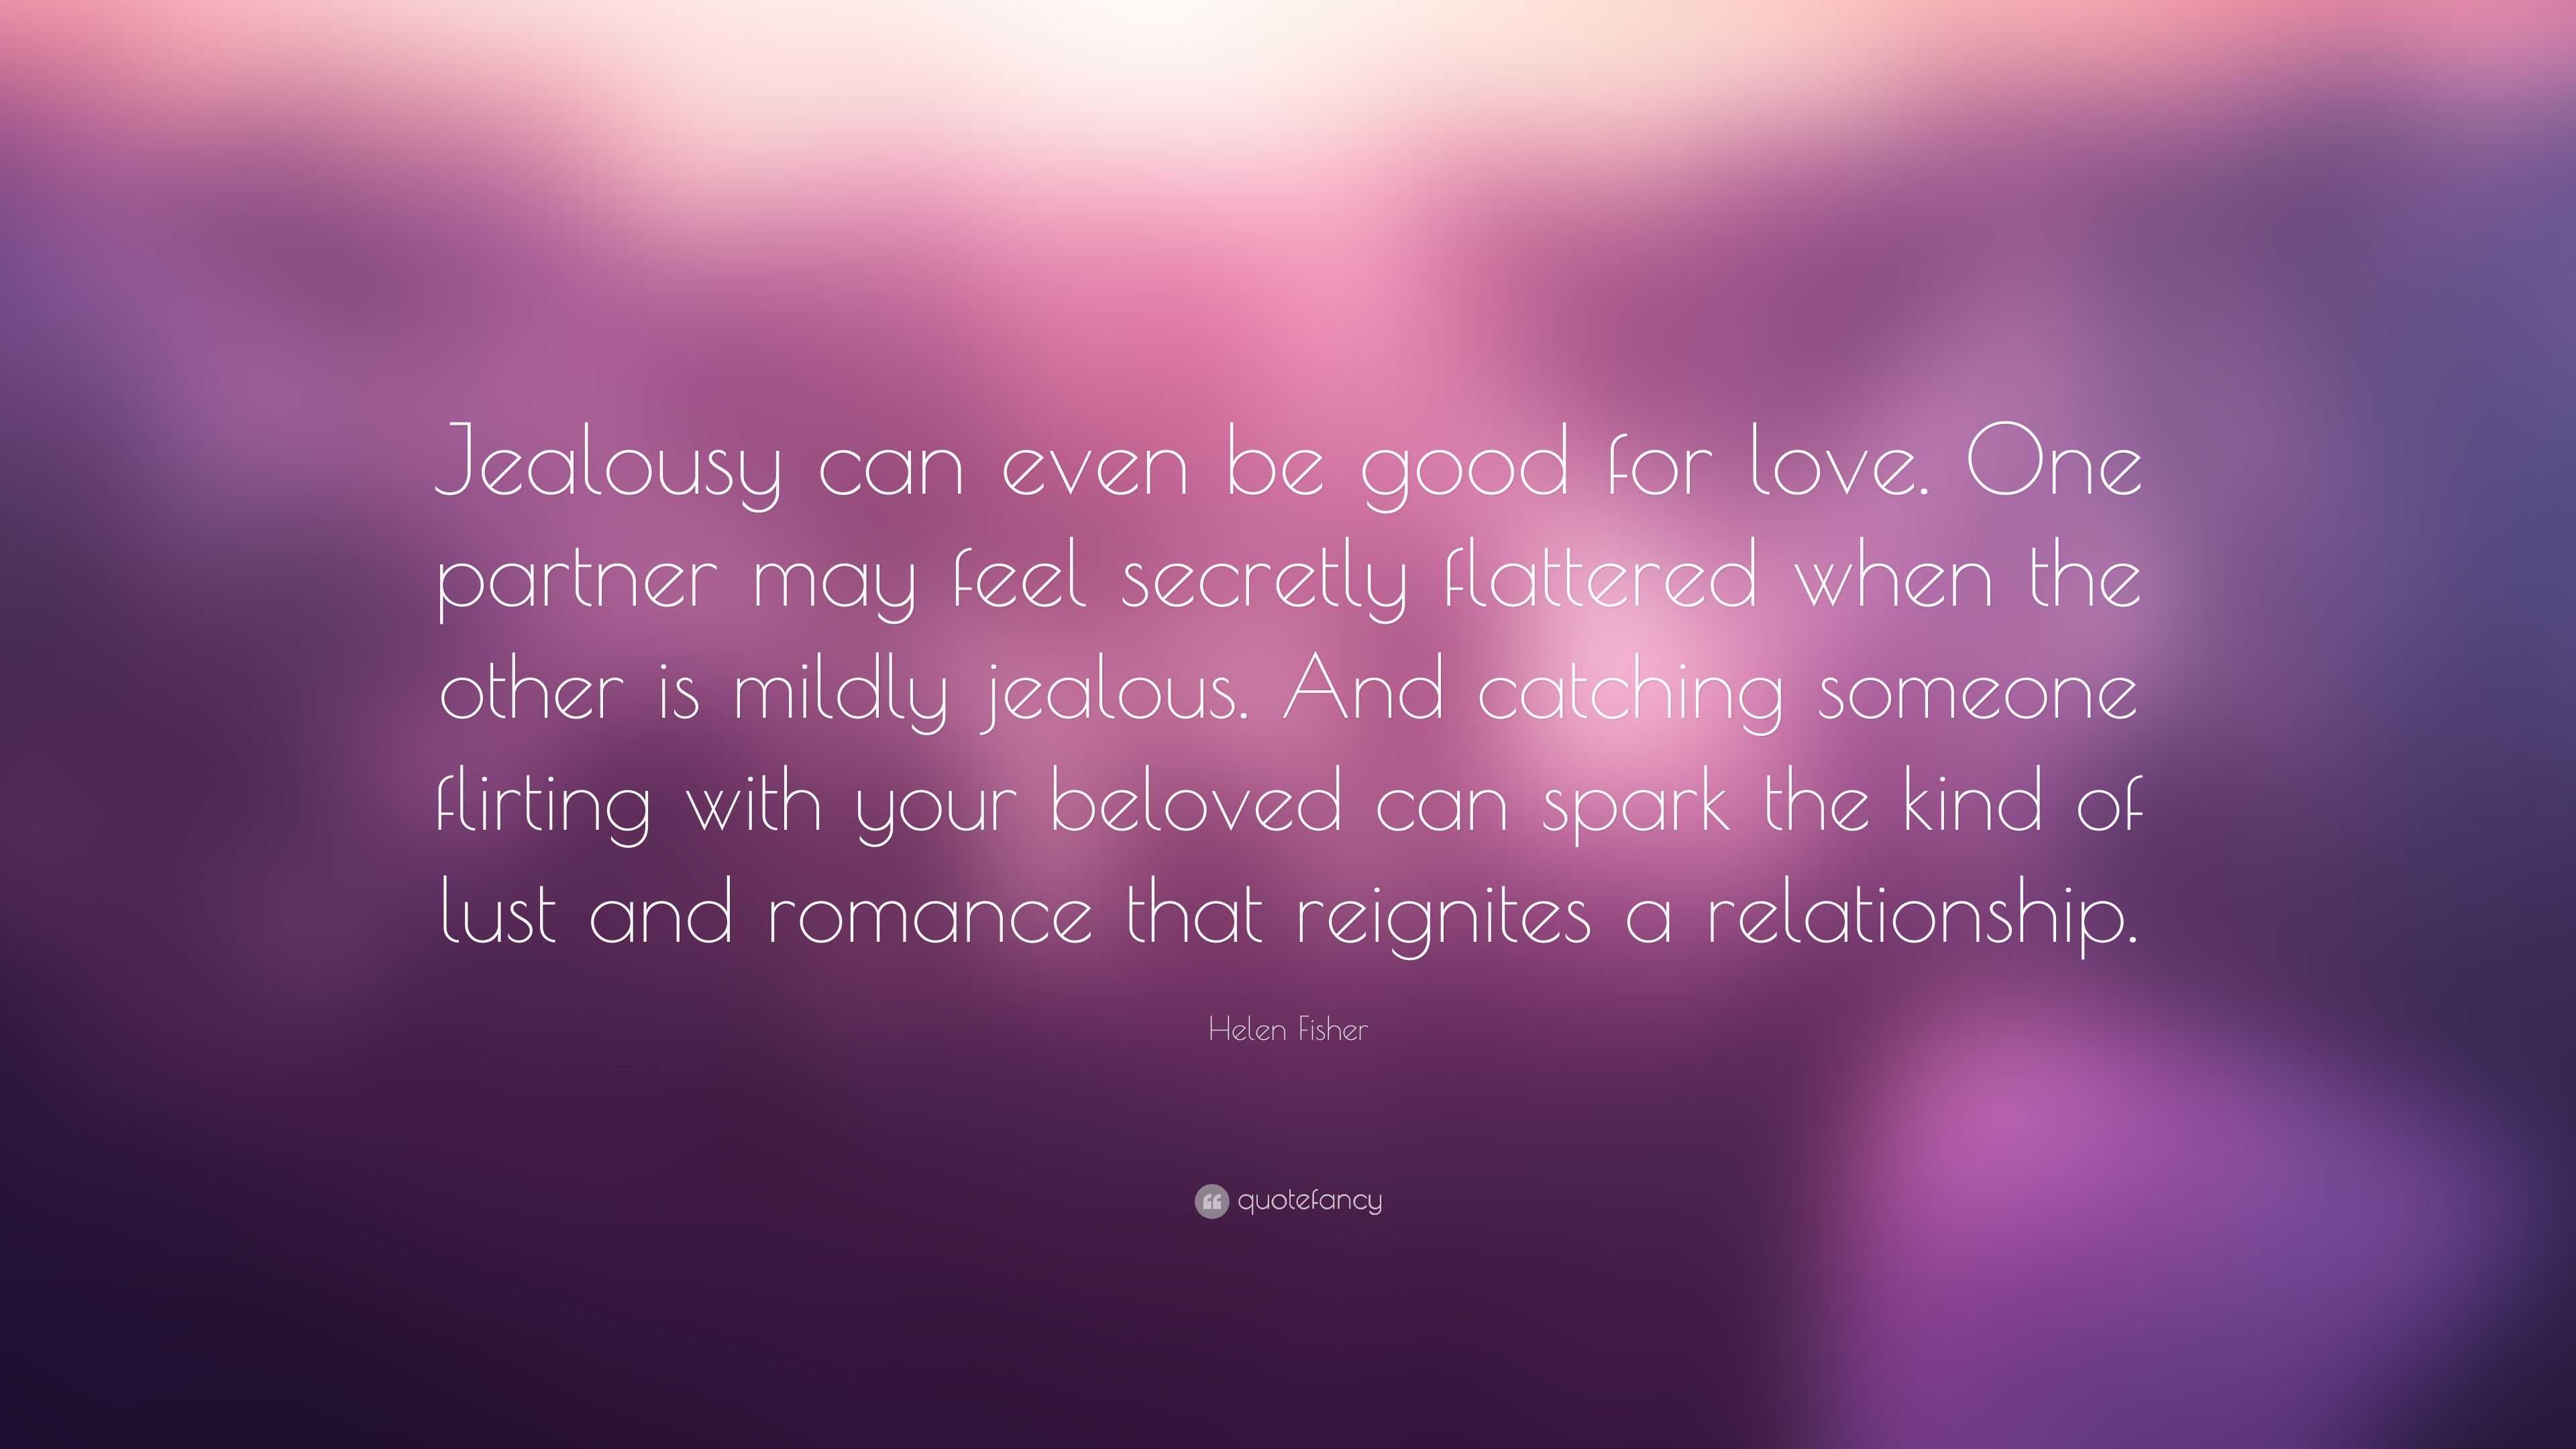 Helen Fisher Quote “Jealousy can even be good for love e partner may